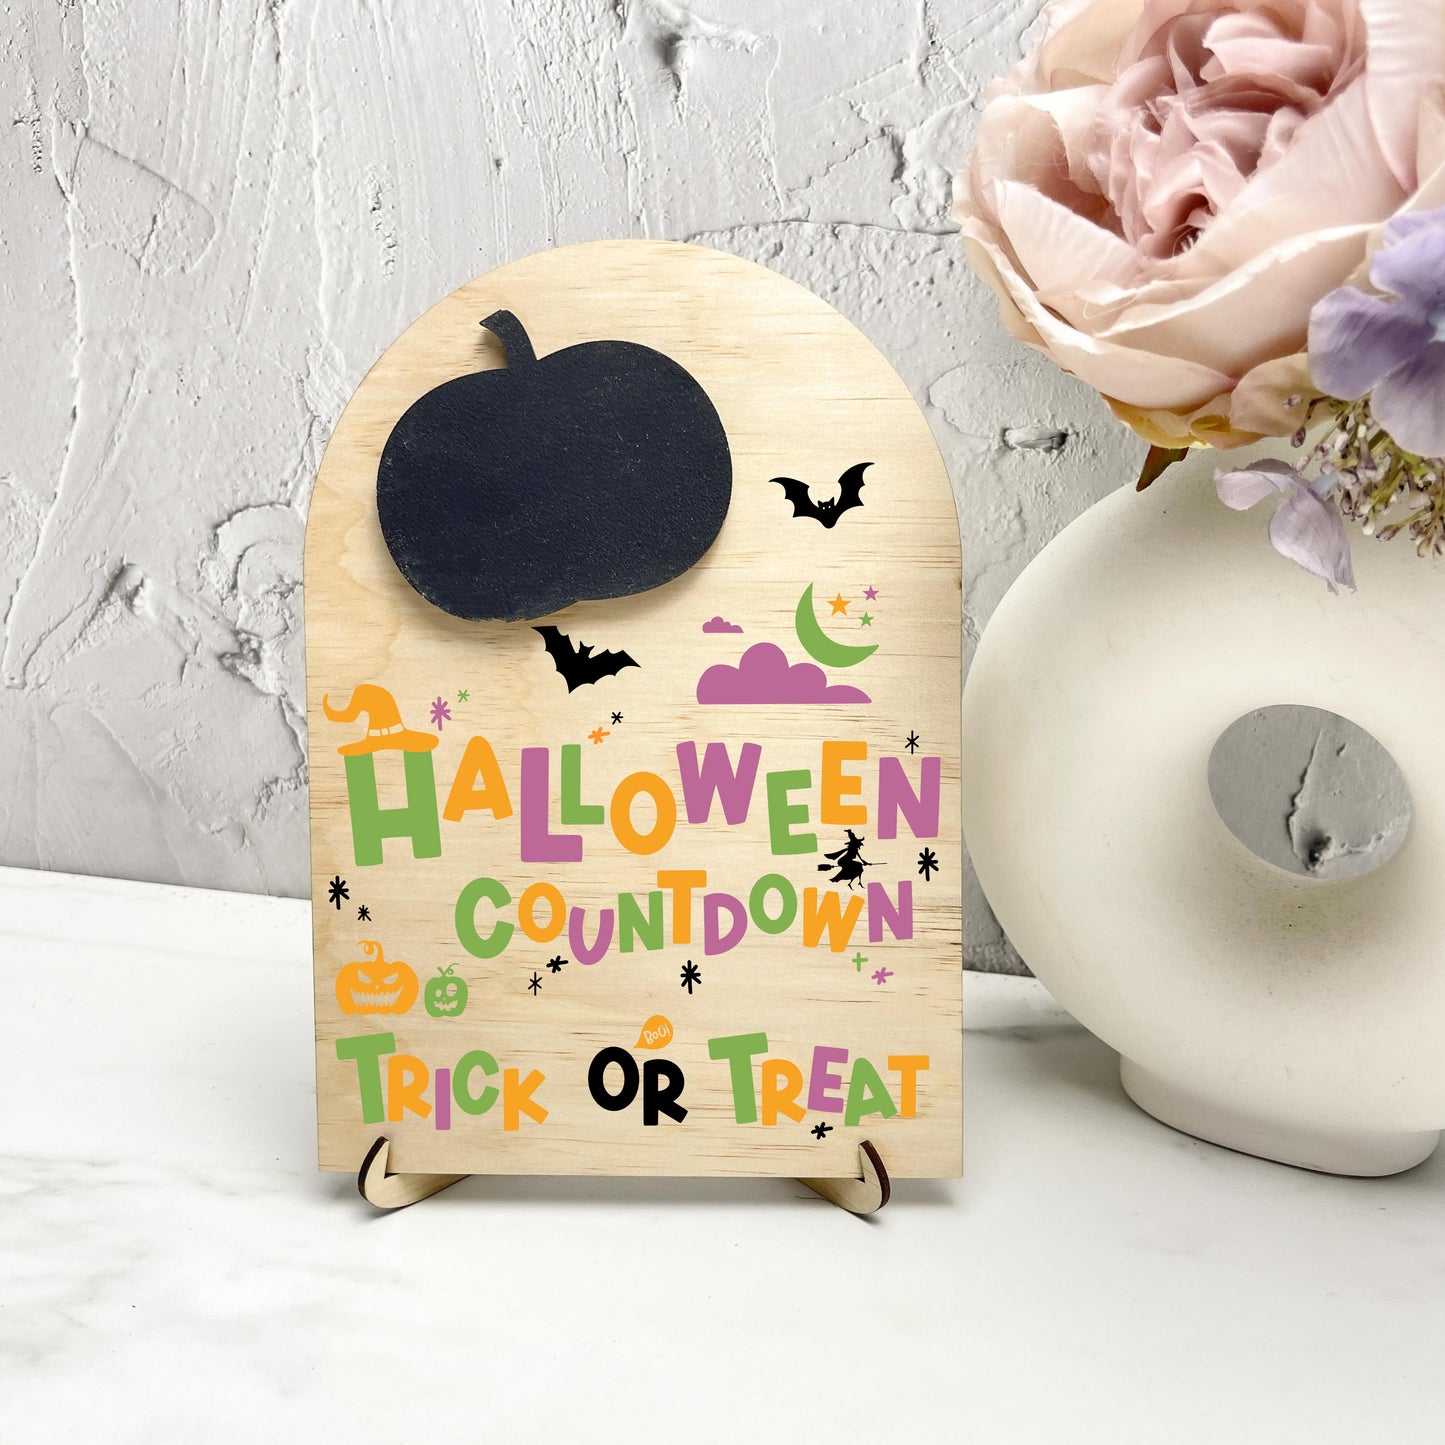 Spooky Halloween Chalkboard, Spooky Halloween, Trick or Treat, witching hour countdown, october, ghostly decor, pumpkin countdown